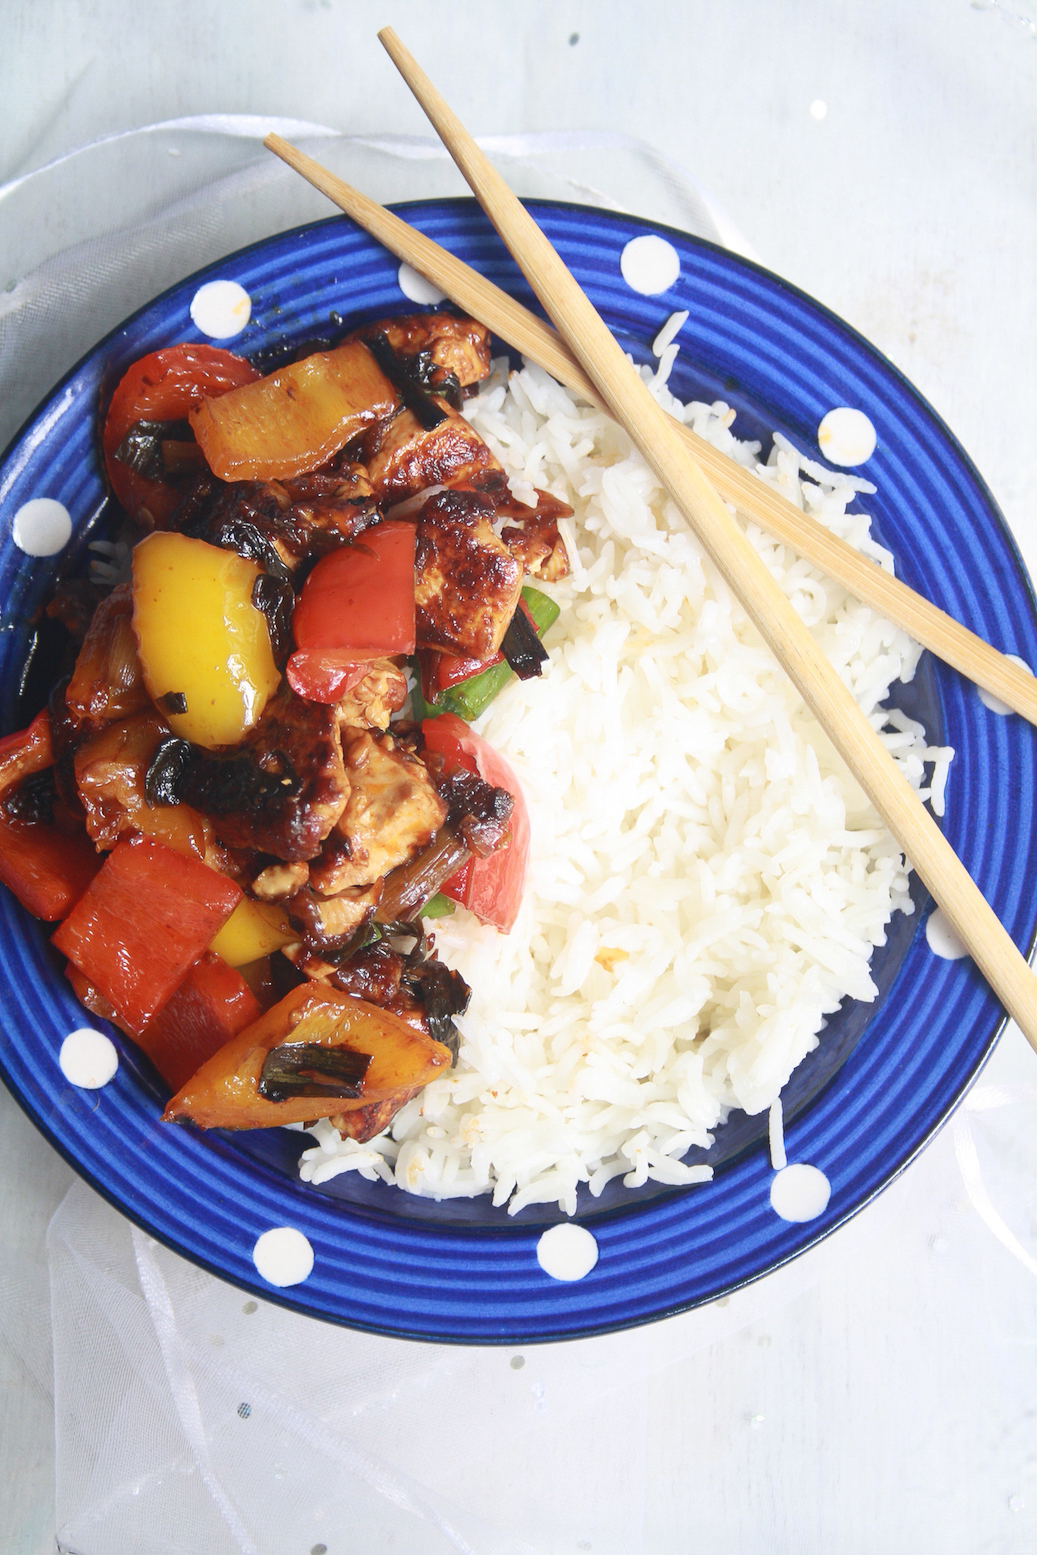 Quick and flavourful tofu veggie stir fry with plenty of zippy ginger teriyaki flavour!